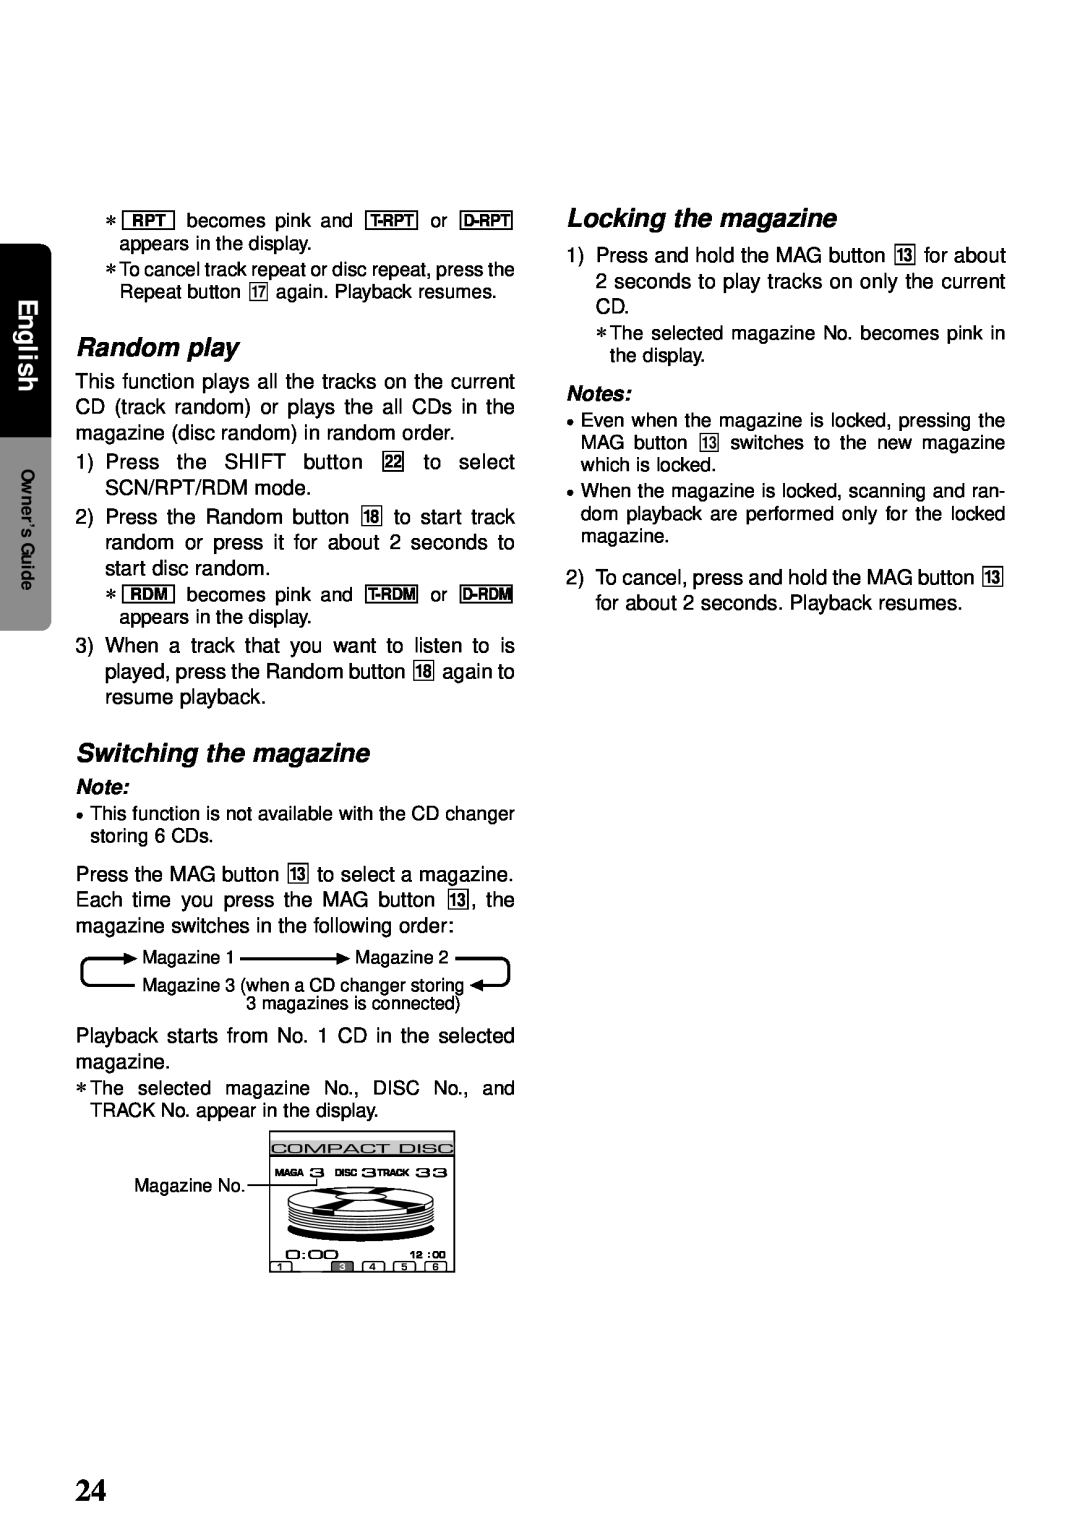 Clarion compact disc manual Switching the magazine, Locking the magazine, Random play, English Owner’s Guide 